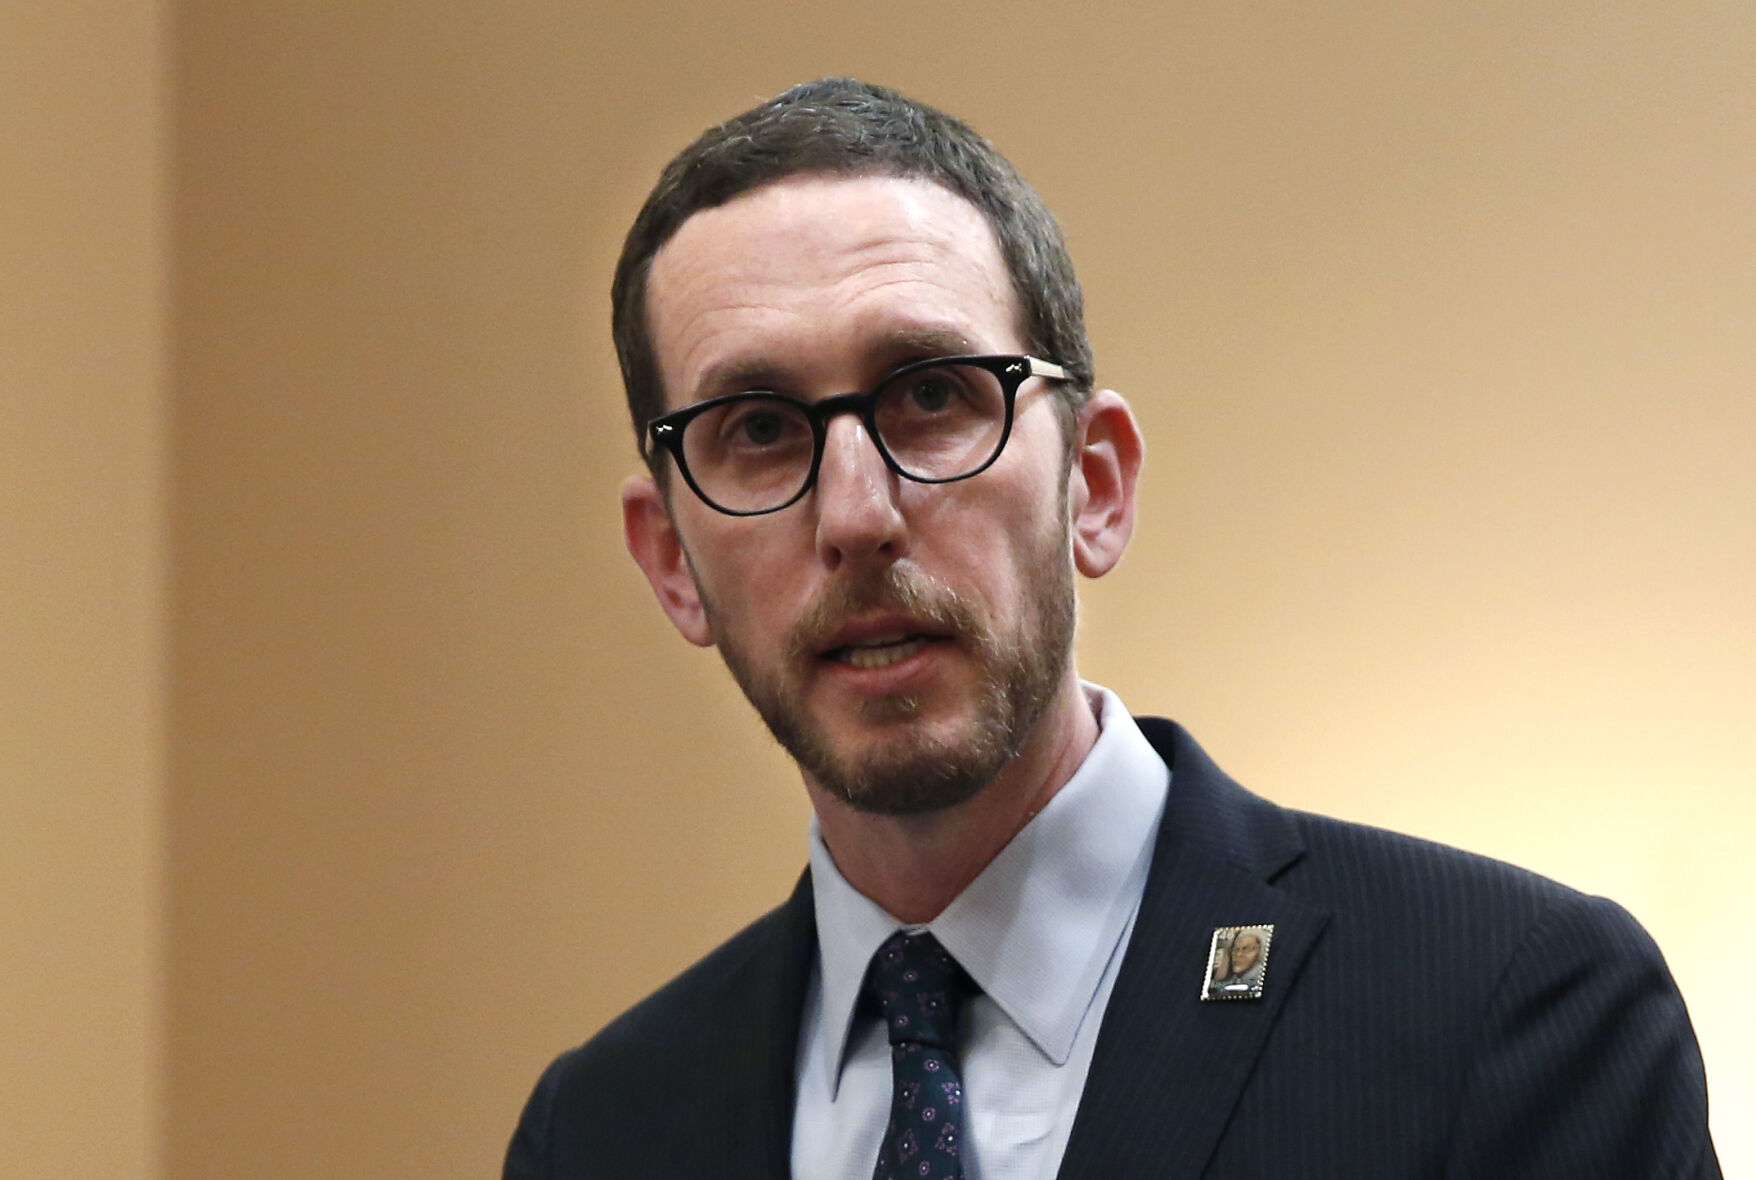 <p>FILE - State Sen. Scott Wiener, D-San Francisco, speaks at a news conference in Sacramento, Calif., on Jan. 21, 2020. California lawmakers approved legislation Monday, Sept. 11, 2023, requiring major companies to disclose a sweeping range of greenhouse gas emissions. The bill, introduced by Wiener, would make companies making more than $1 billion annually report their direct and indirect emissions. (AP Photo/Rich Pedroncelli, File)</p>   PHOTO CREDIT: Rich Pedroncelli 